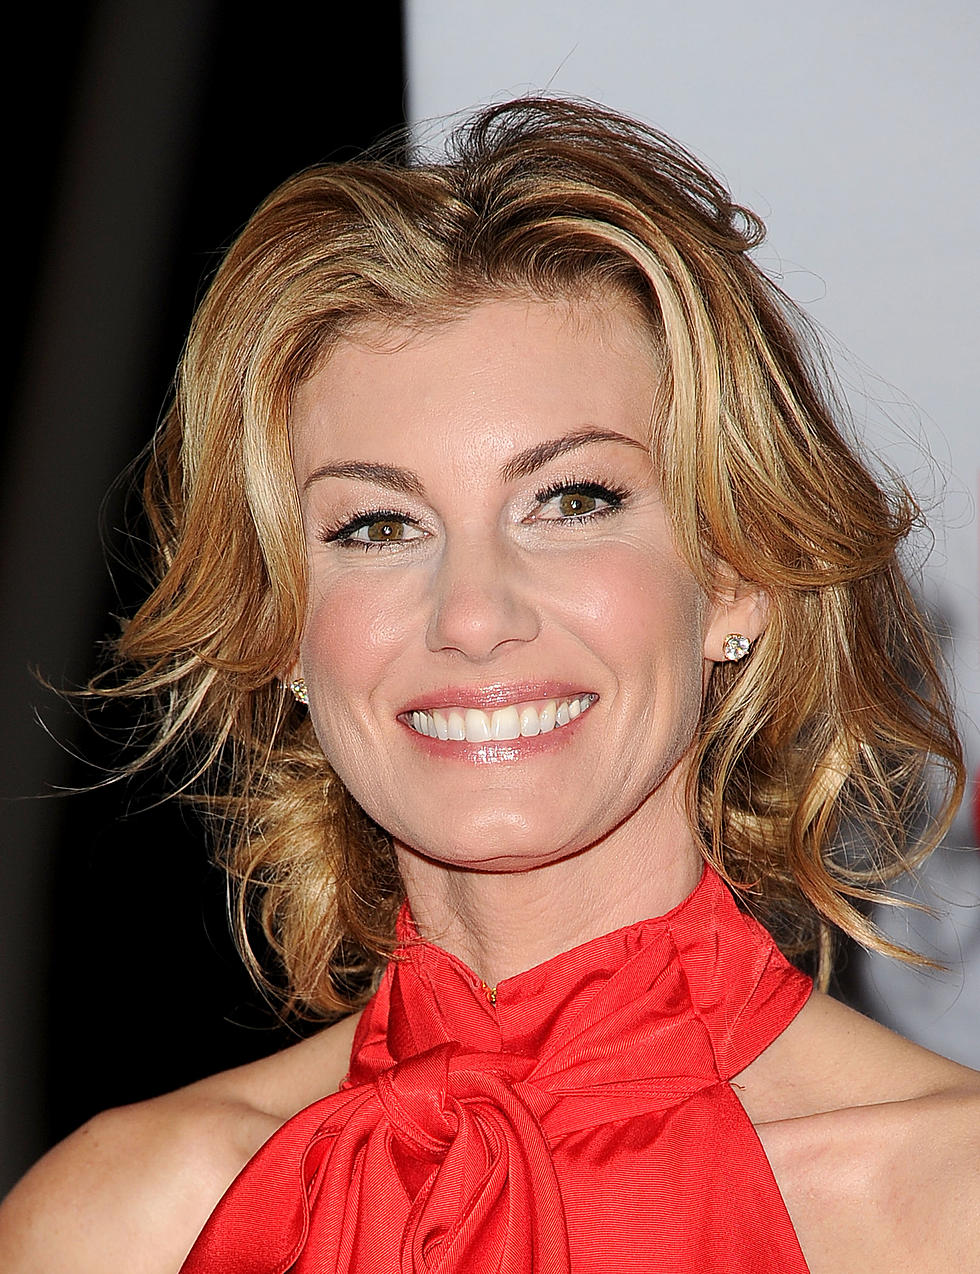 Is Faith Hill the Hottest Female Country Singer?